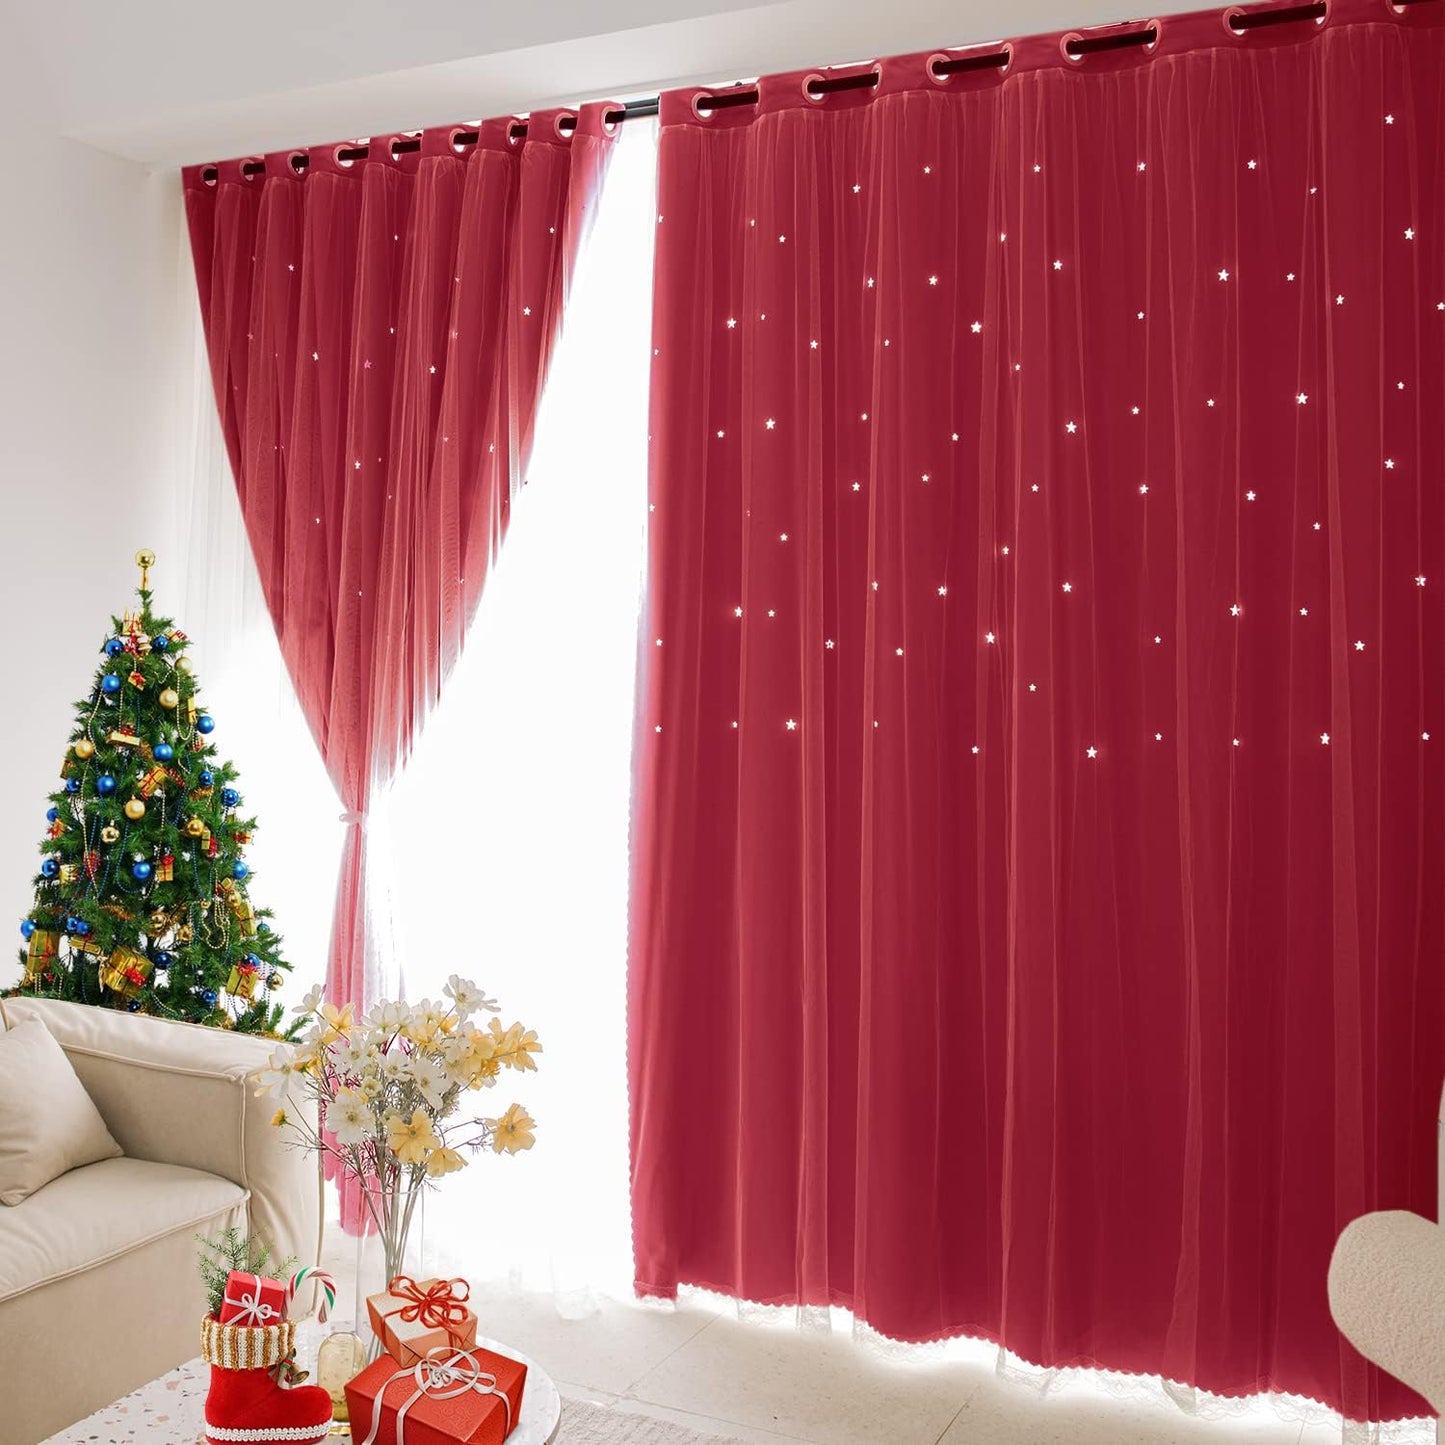 UNISTAR 2 Panels Stars Blackout Curtains for Bedroom Girls Kids Baby Window Decoration Double Layer Star Cut Out Aesthetic Living Room Decor Wall Home Curtain,W52 X L63 Inches,Pink  UNISTAR 2Panels 丨Double-Layer,Red 63.00" X 52.00" 